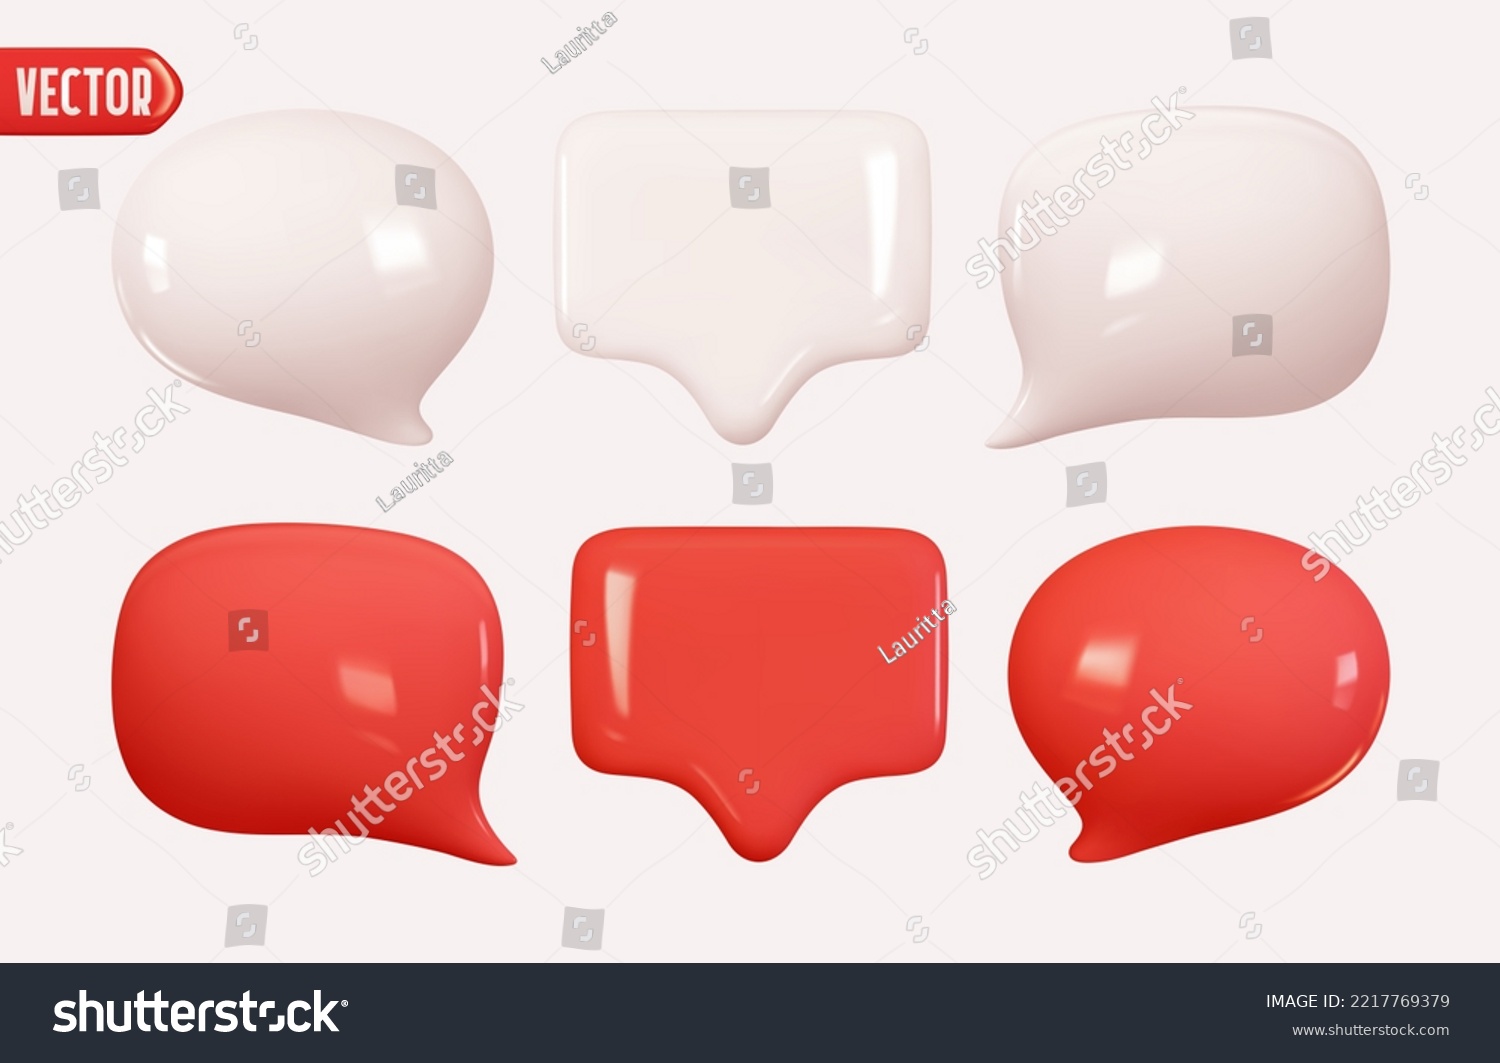 Collection Speech bubbles red and white color. Chat dialogue bubble text. Modern Realistic 3d design. The set is isolated. vector illustration #2217769379